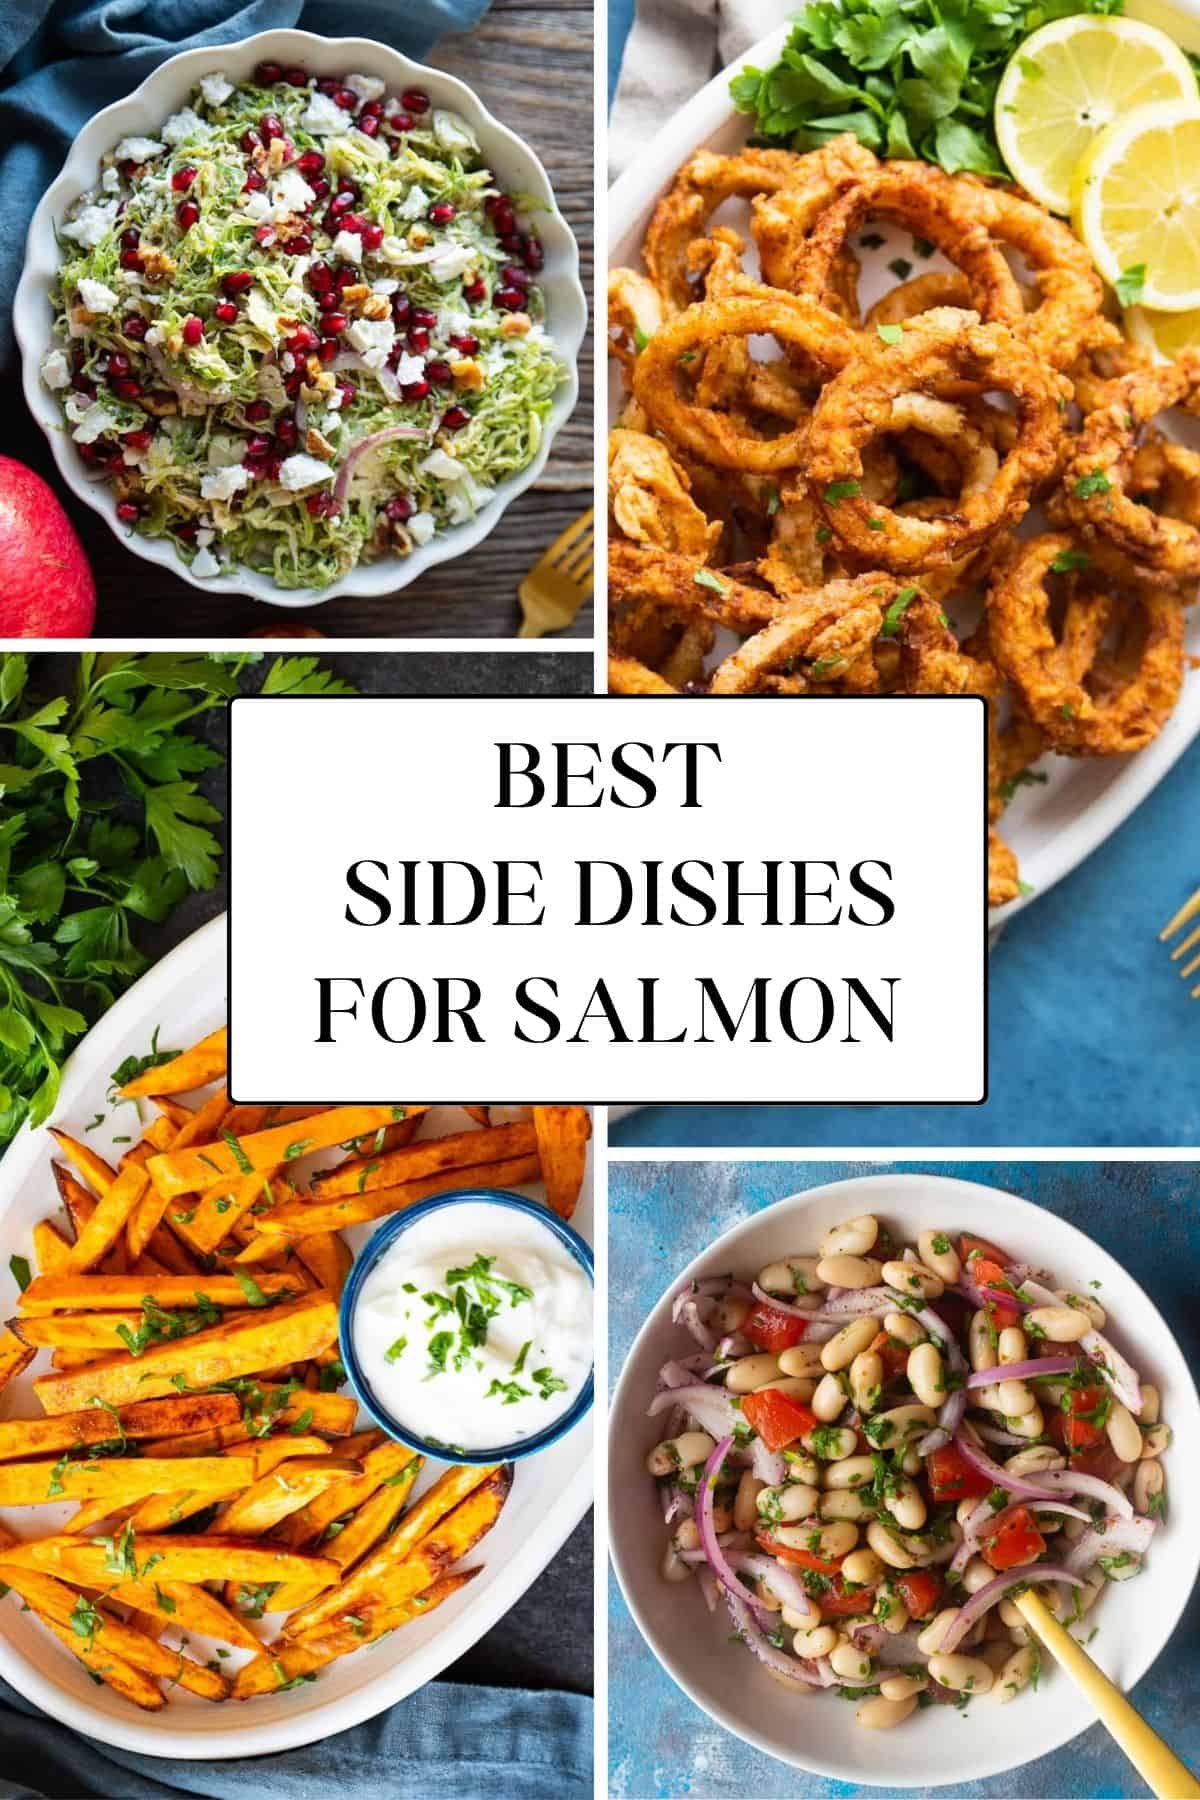 Looking for delicious side dishes for salmon? I've got you covered! From grilled and roasted vegetables to potato and rice dishes, here you can find so many easy side dishes that would complement salmon so well.